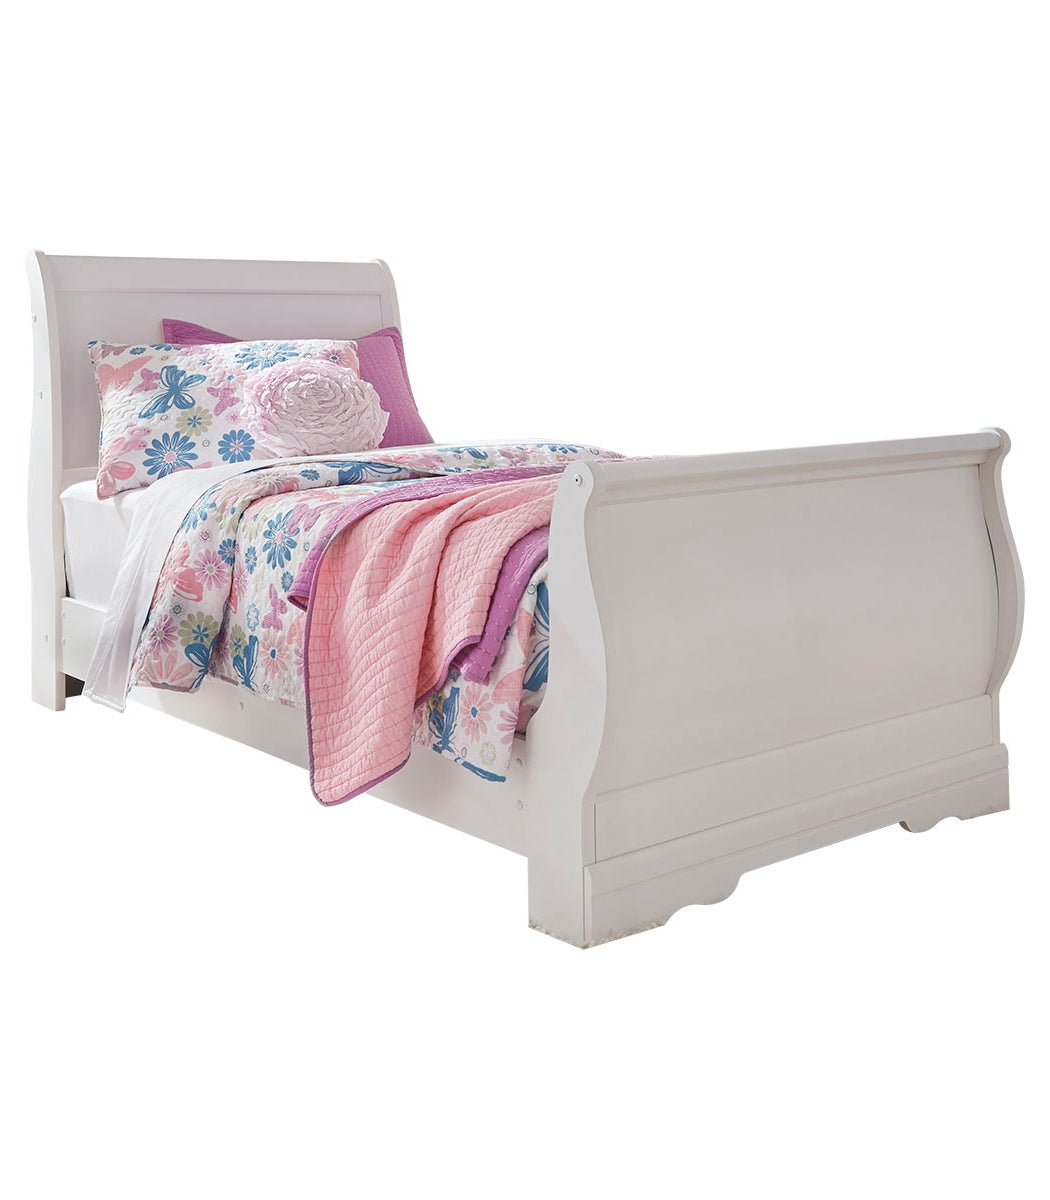 Anarasia Twin Sleigh Bed with Mirrored Dresser, Chest and 2 Nightstands